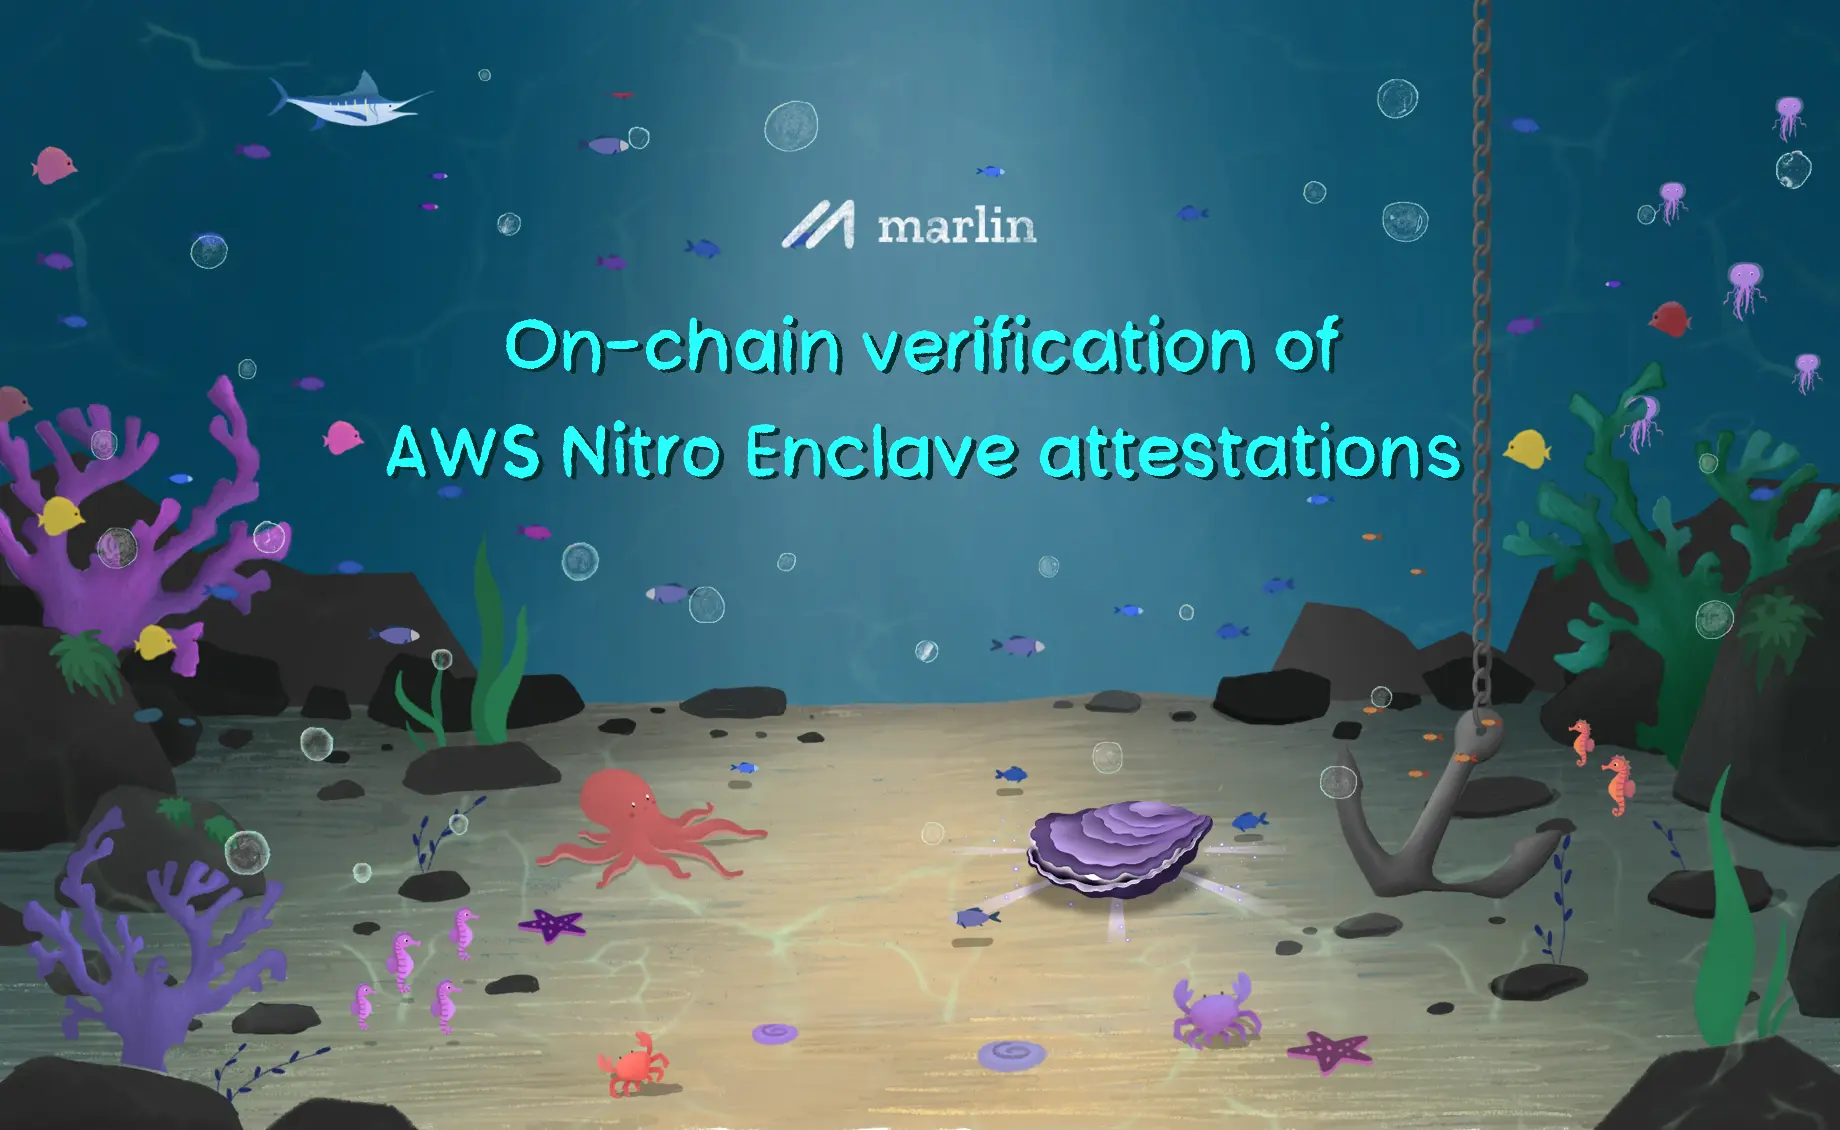 On-chain verification of AWS Nitro Enclave attestations